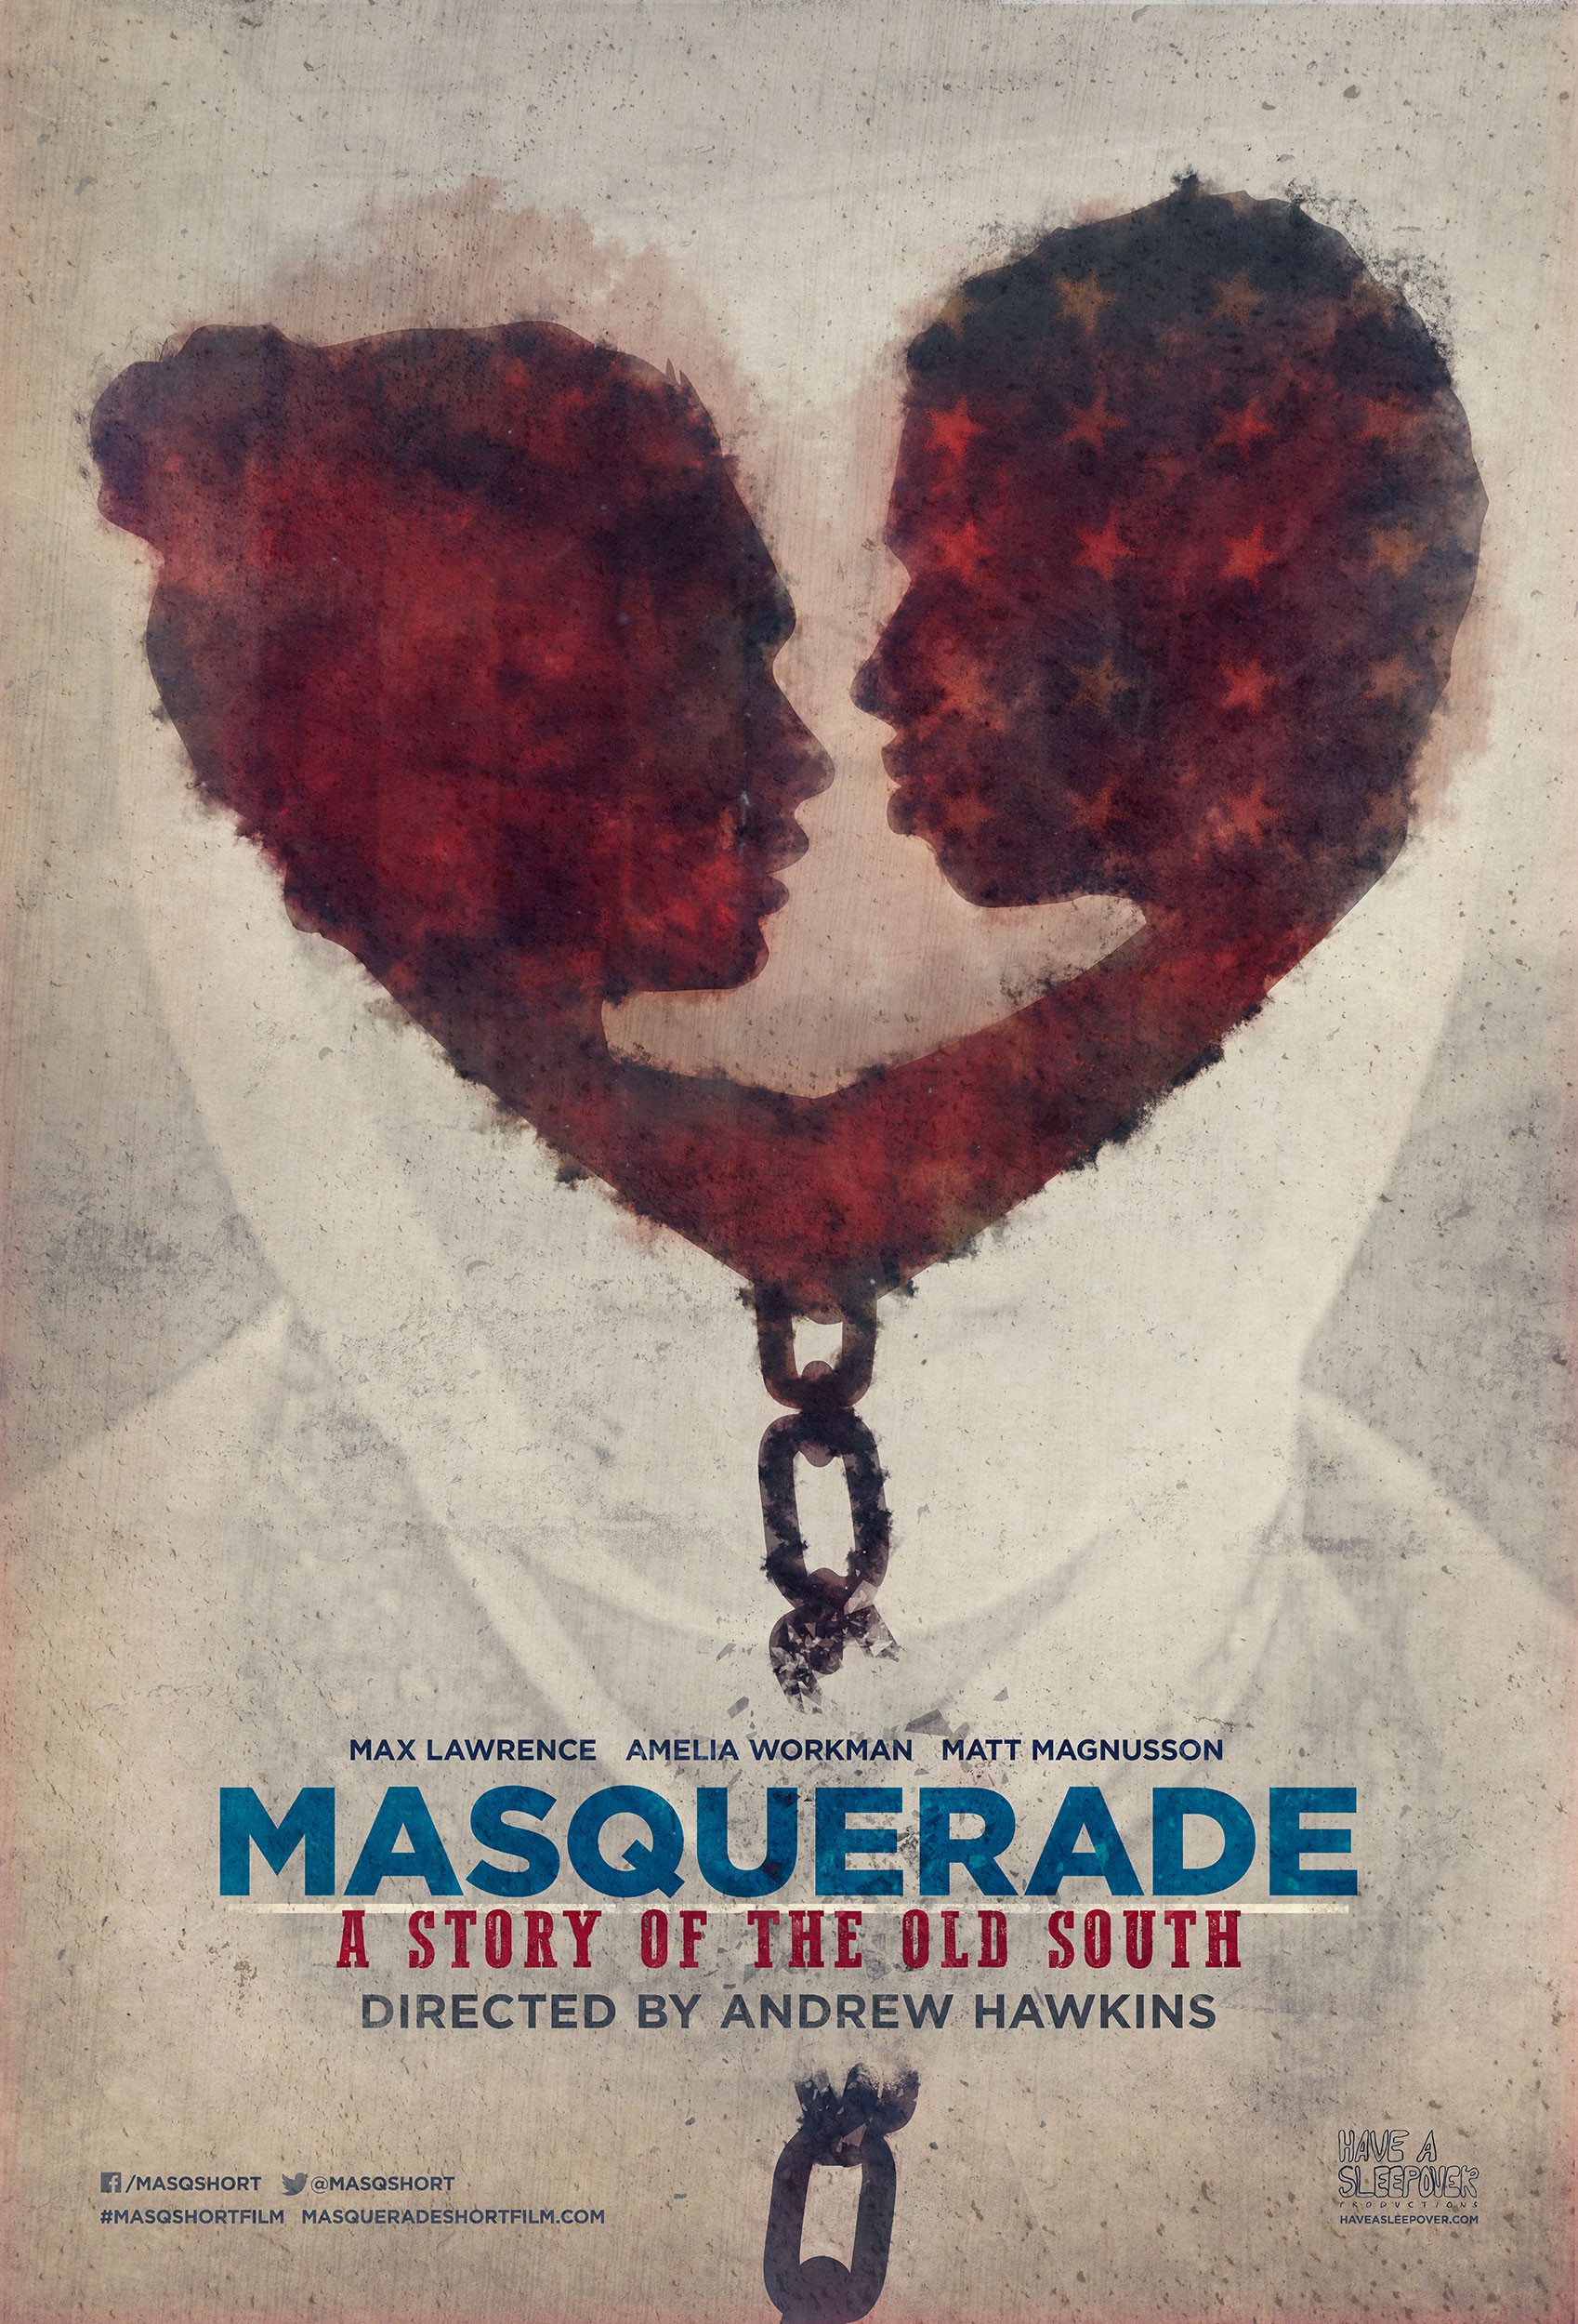 Mega Sized Movie Poster Image for Masquerade, a Story of the Old South